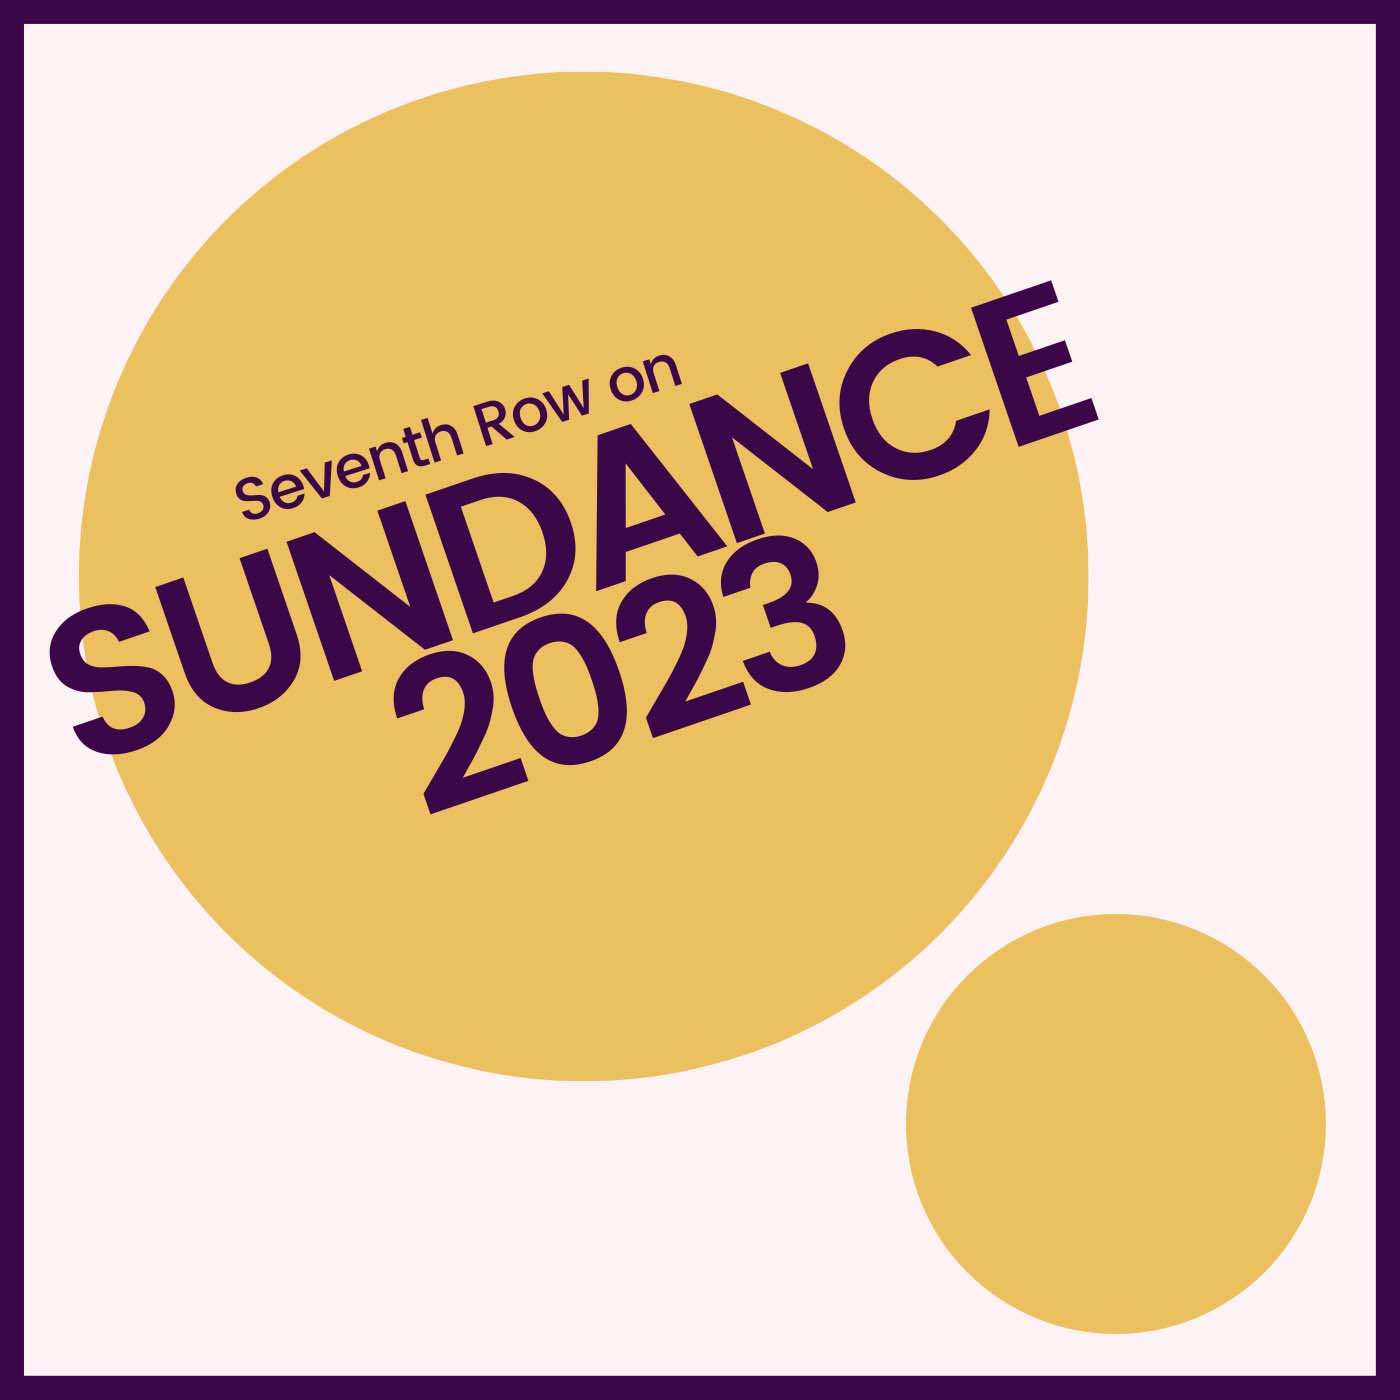 Sundance 2023 podcast season image. Two yellow circles. The larger one on the left contains the text "Seventh Row on Sundance 2023" in purple.